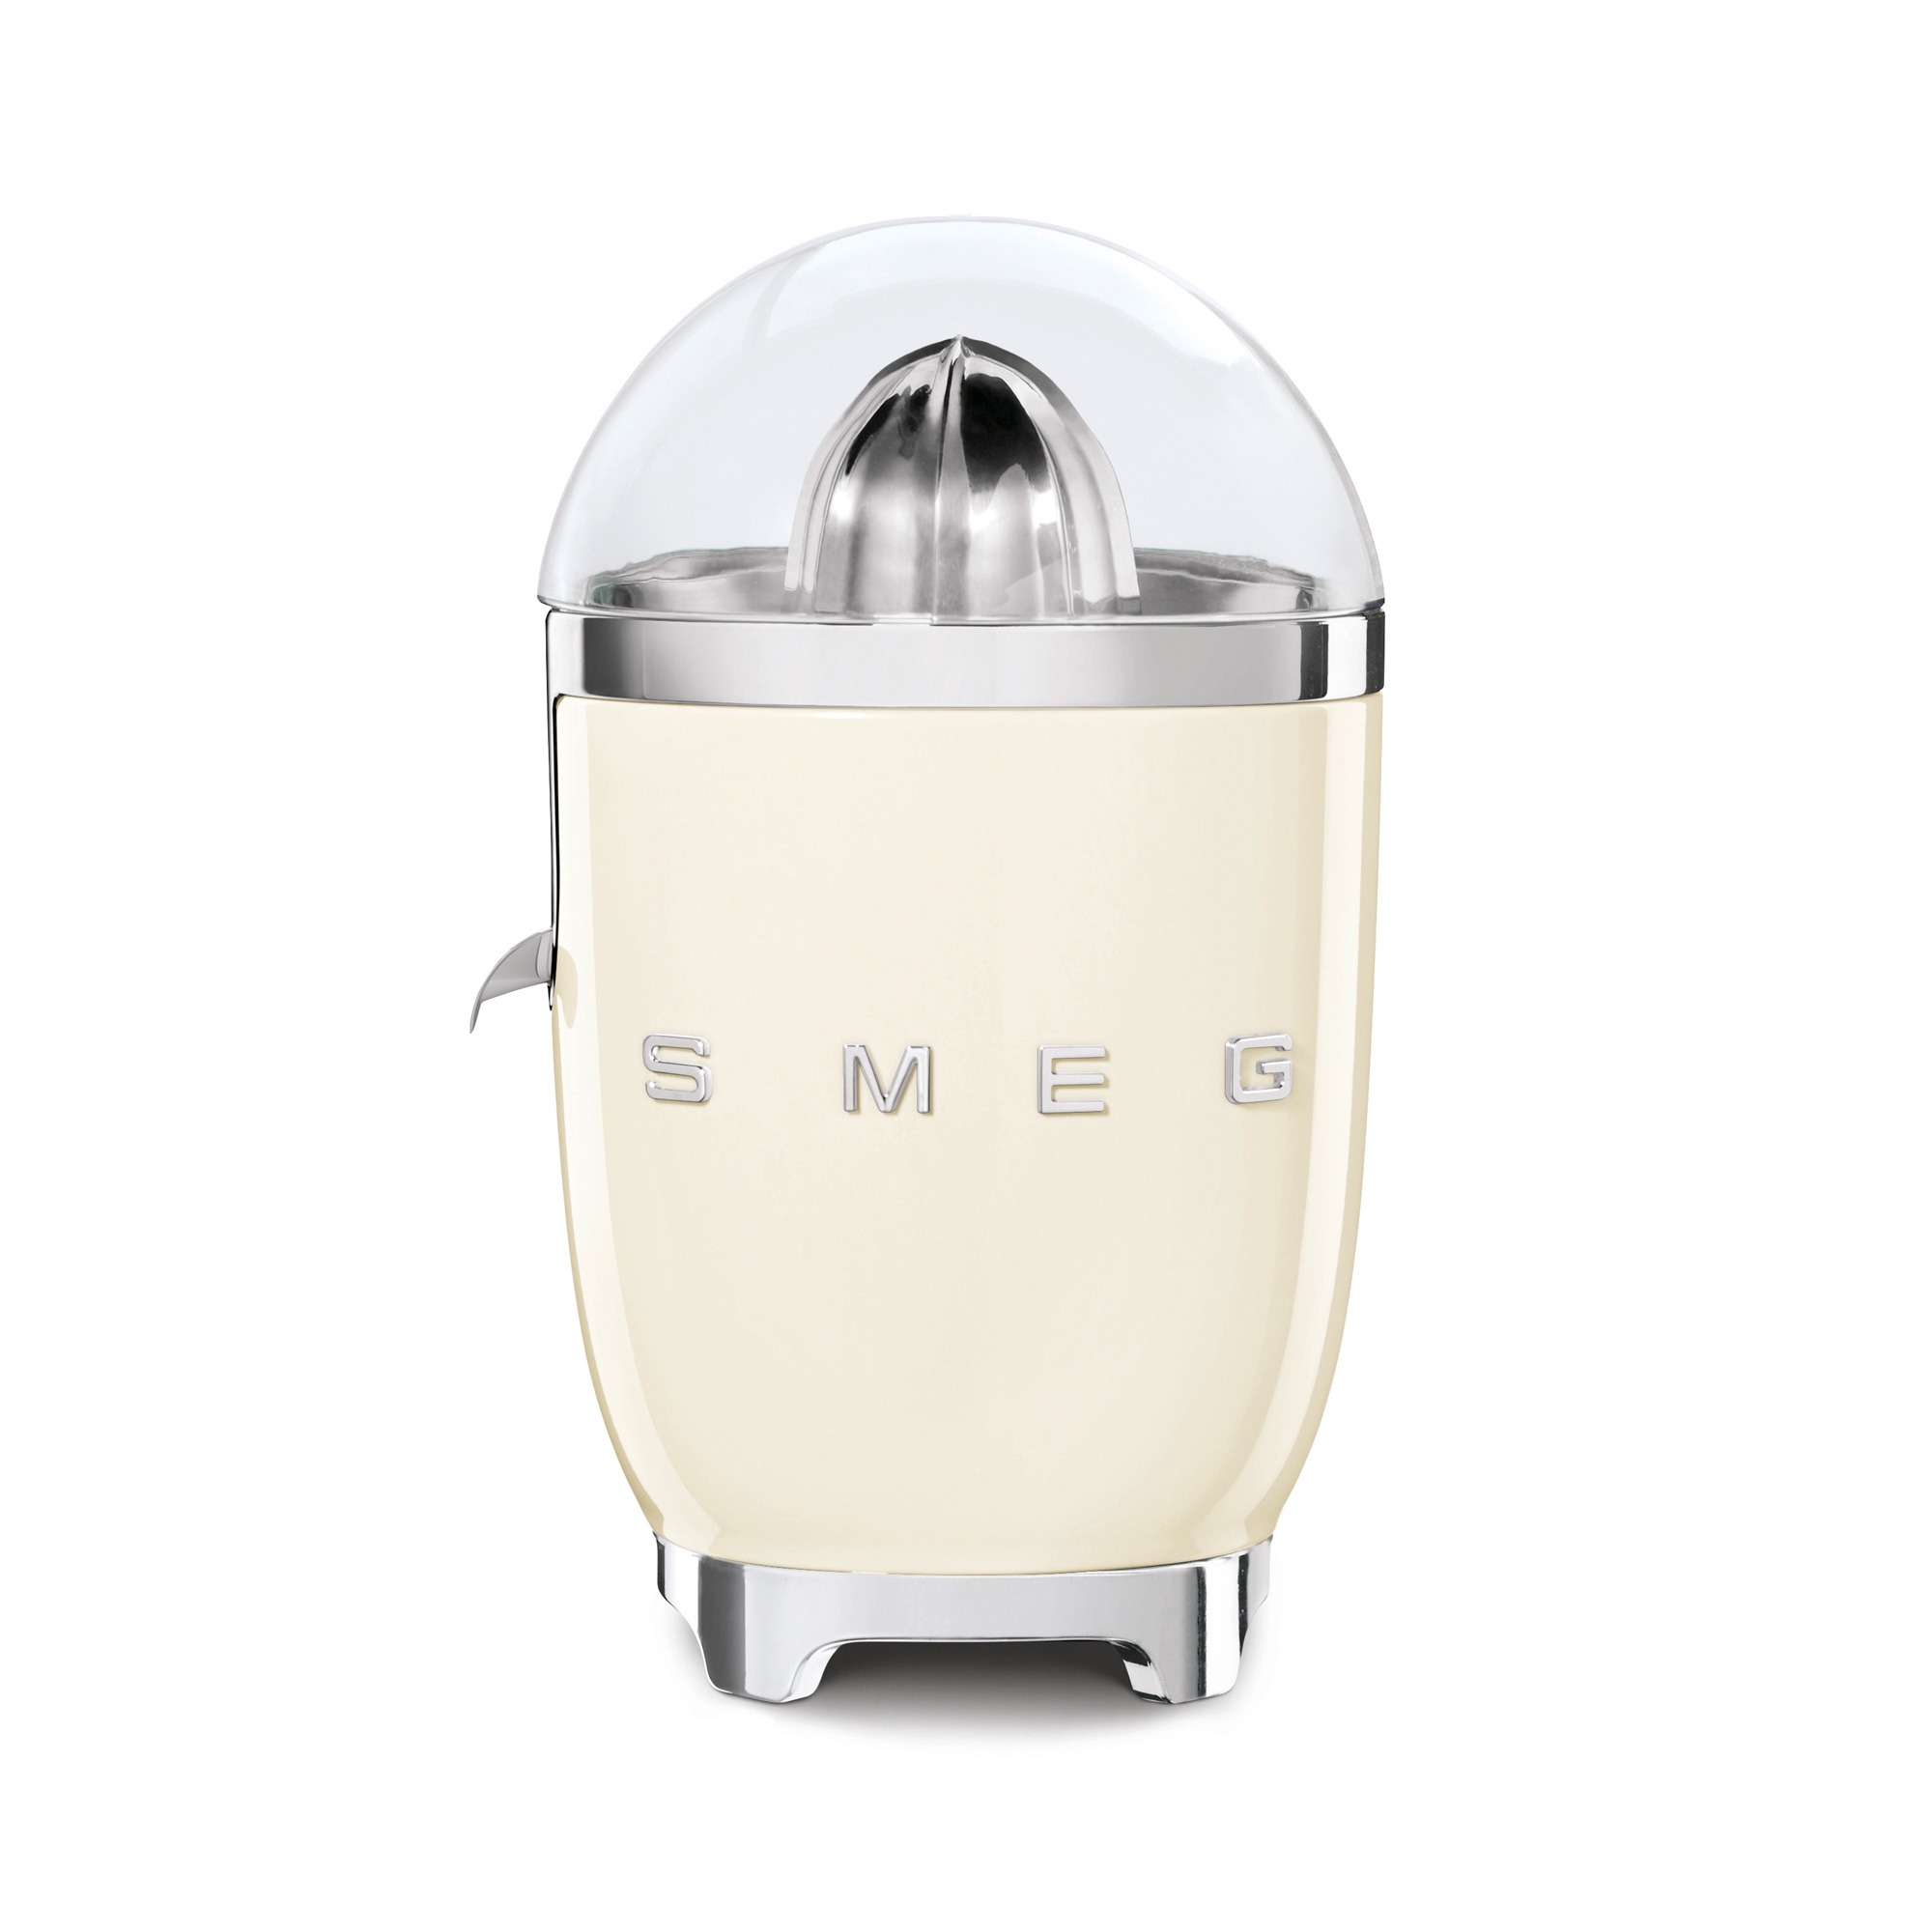 Smeg - juicer - design line style The 50 ° years